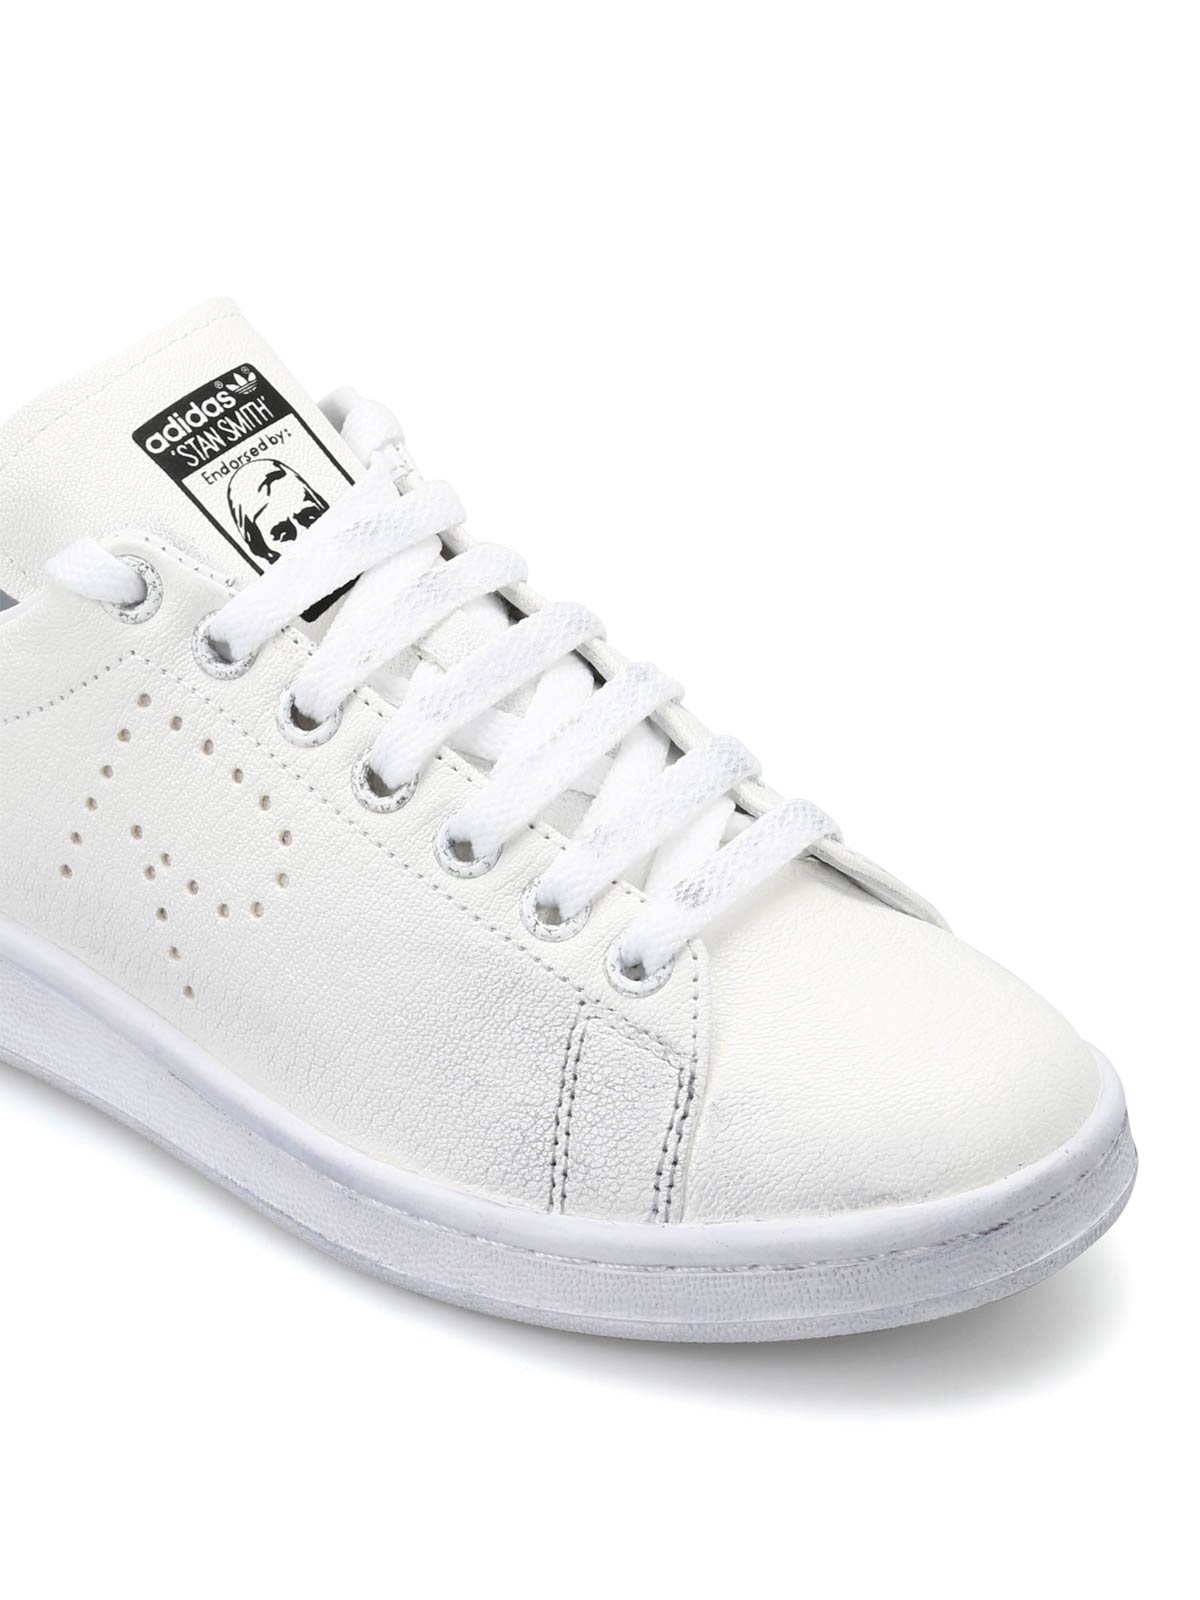 Duiker Knipperen Gestaag Trainers Adidas Originals - Raf Simons Stan Smith Aged sneakers -  S74619WFTWWHTCBLACKFTWWHT